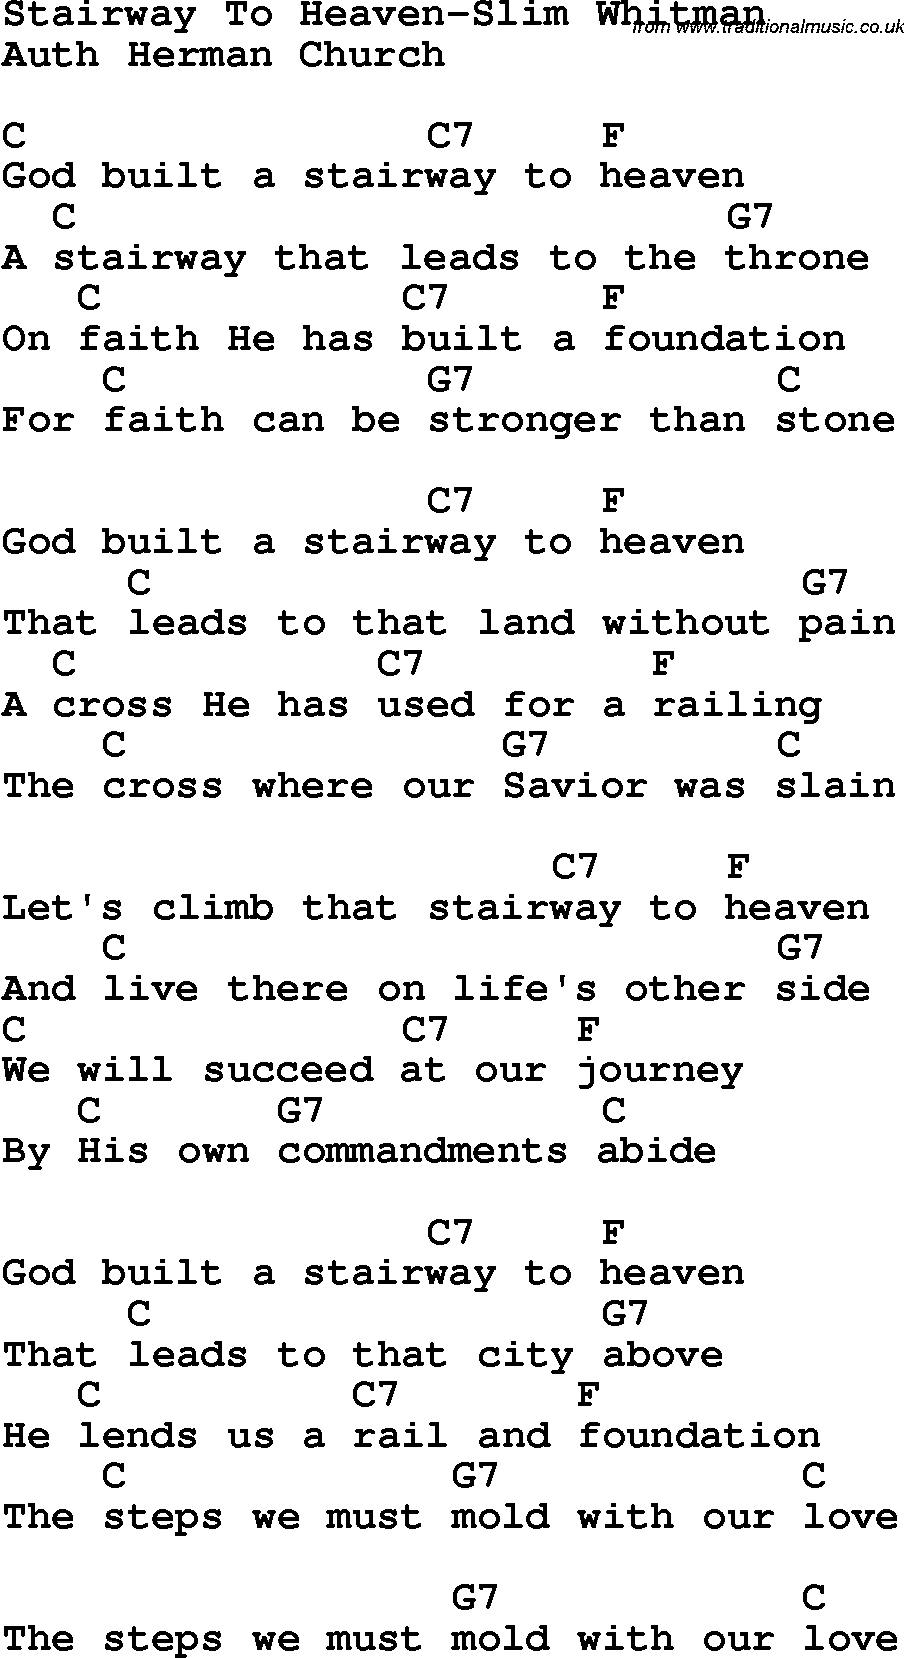 Country, Southern and Bluegrass Gospel Song Stairway To Heaven-Slim Whitman lyrics and chords